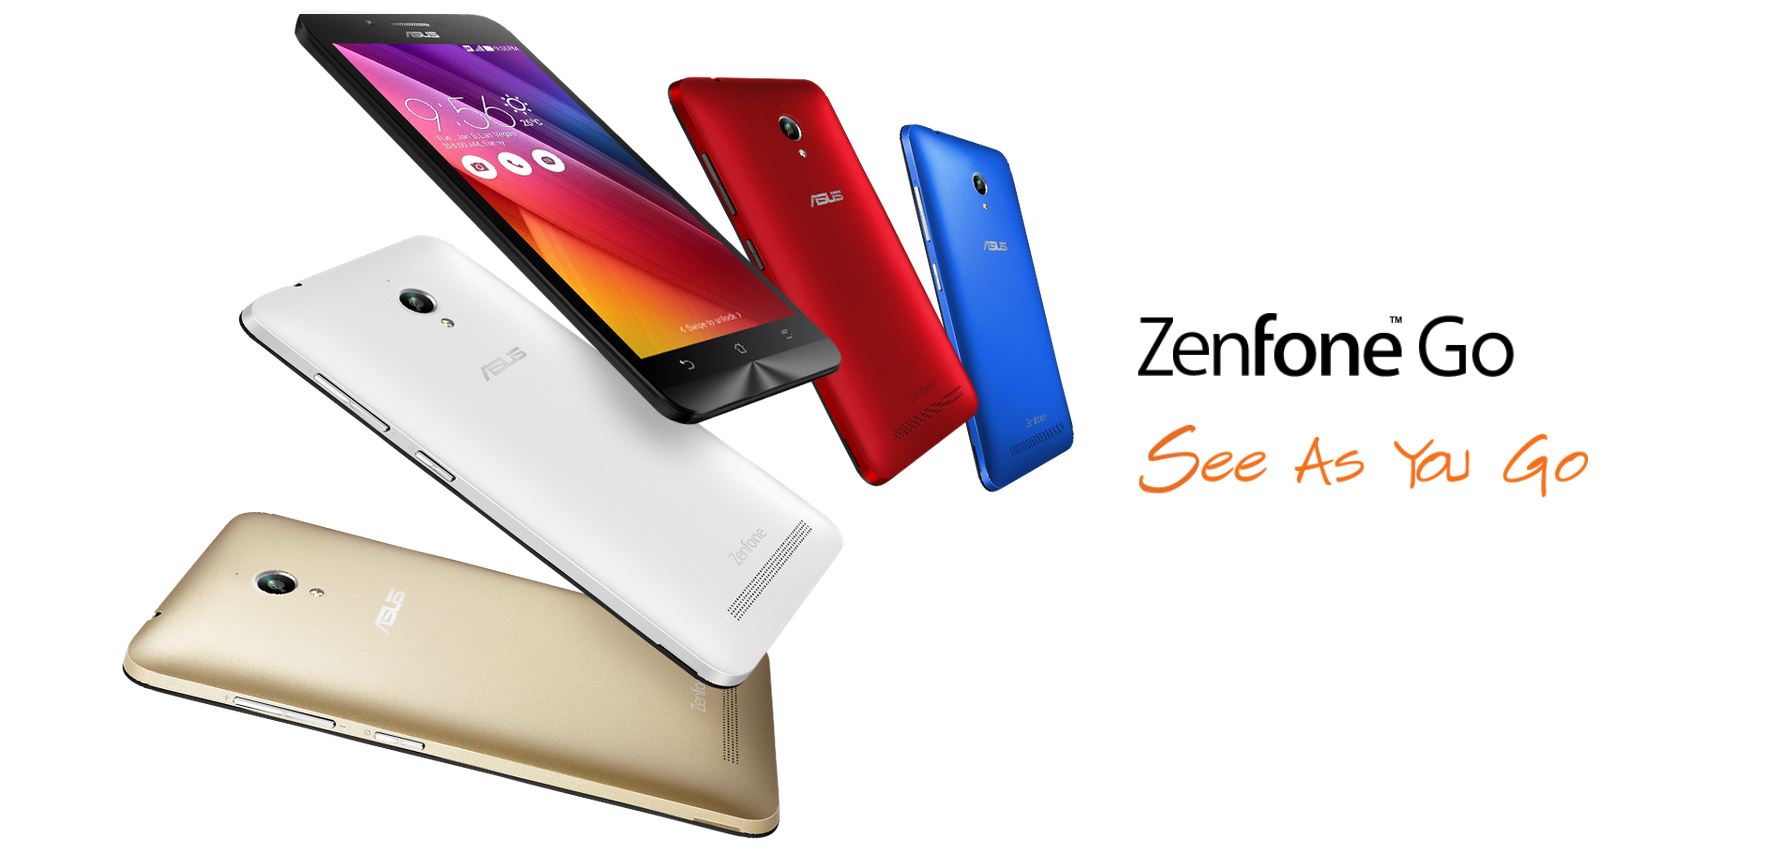 ASUS Zenfone GO is now available in ASUS MY store 25